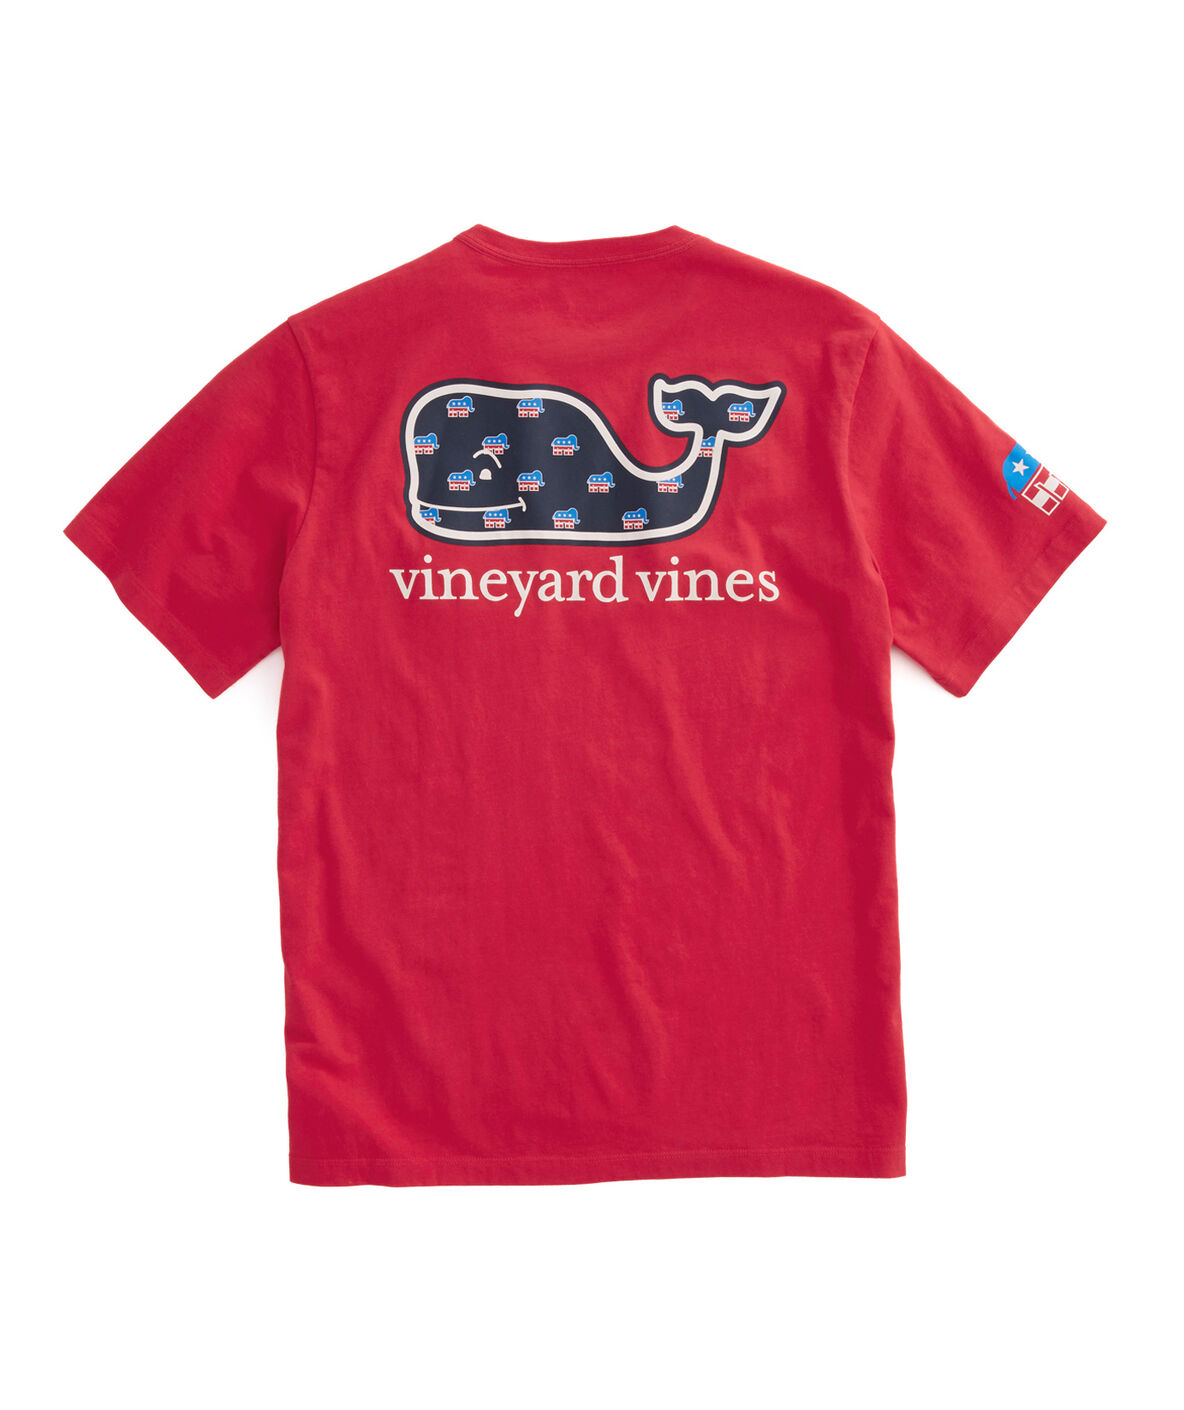 Shop Short-Sleeve Right Whale T-Shirt at vineyard vines